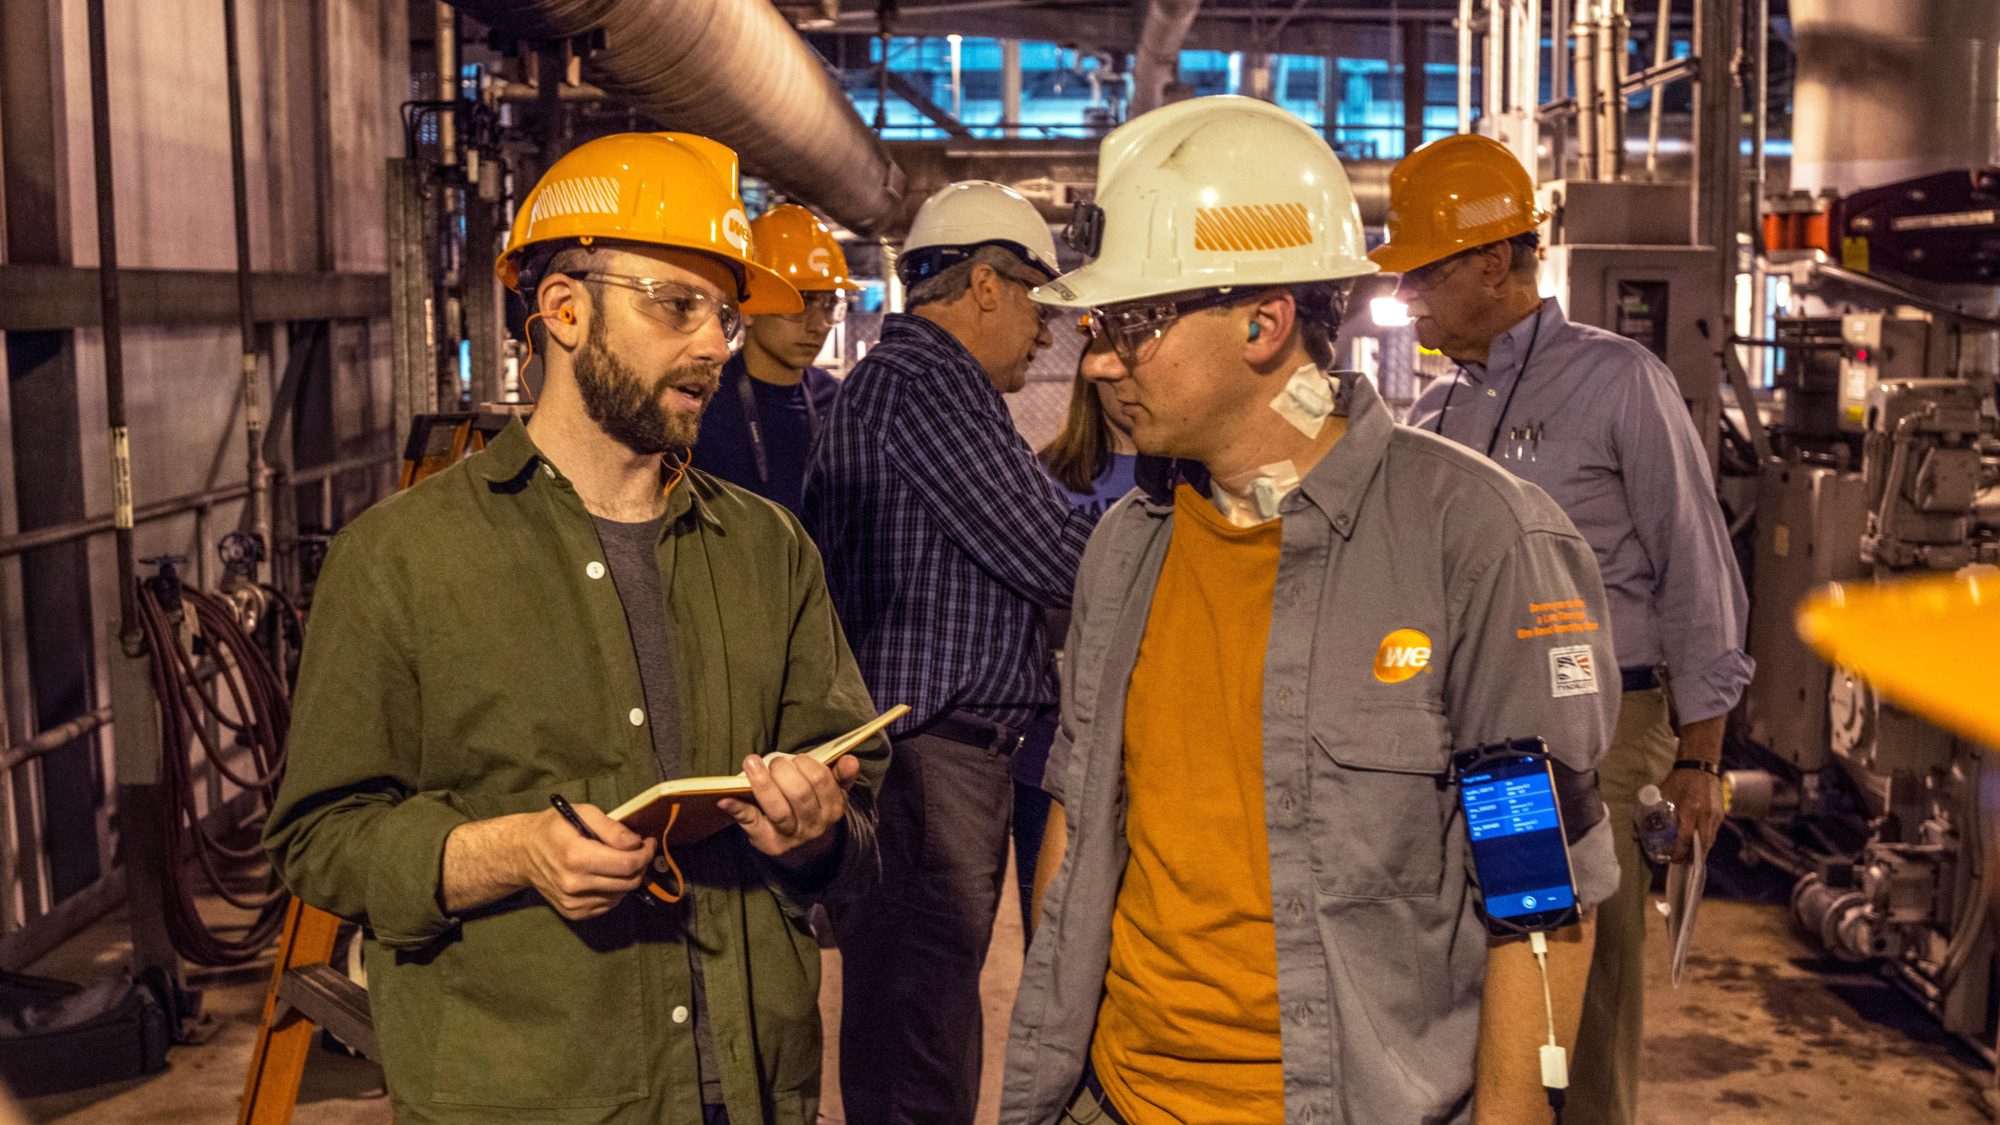 In a factory-like environment, several men wearing hard hats stand around, discussing things.